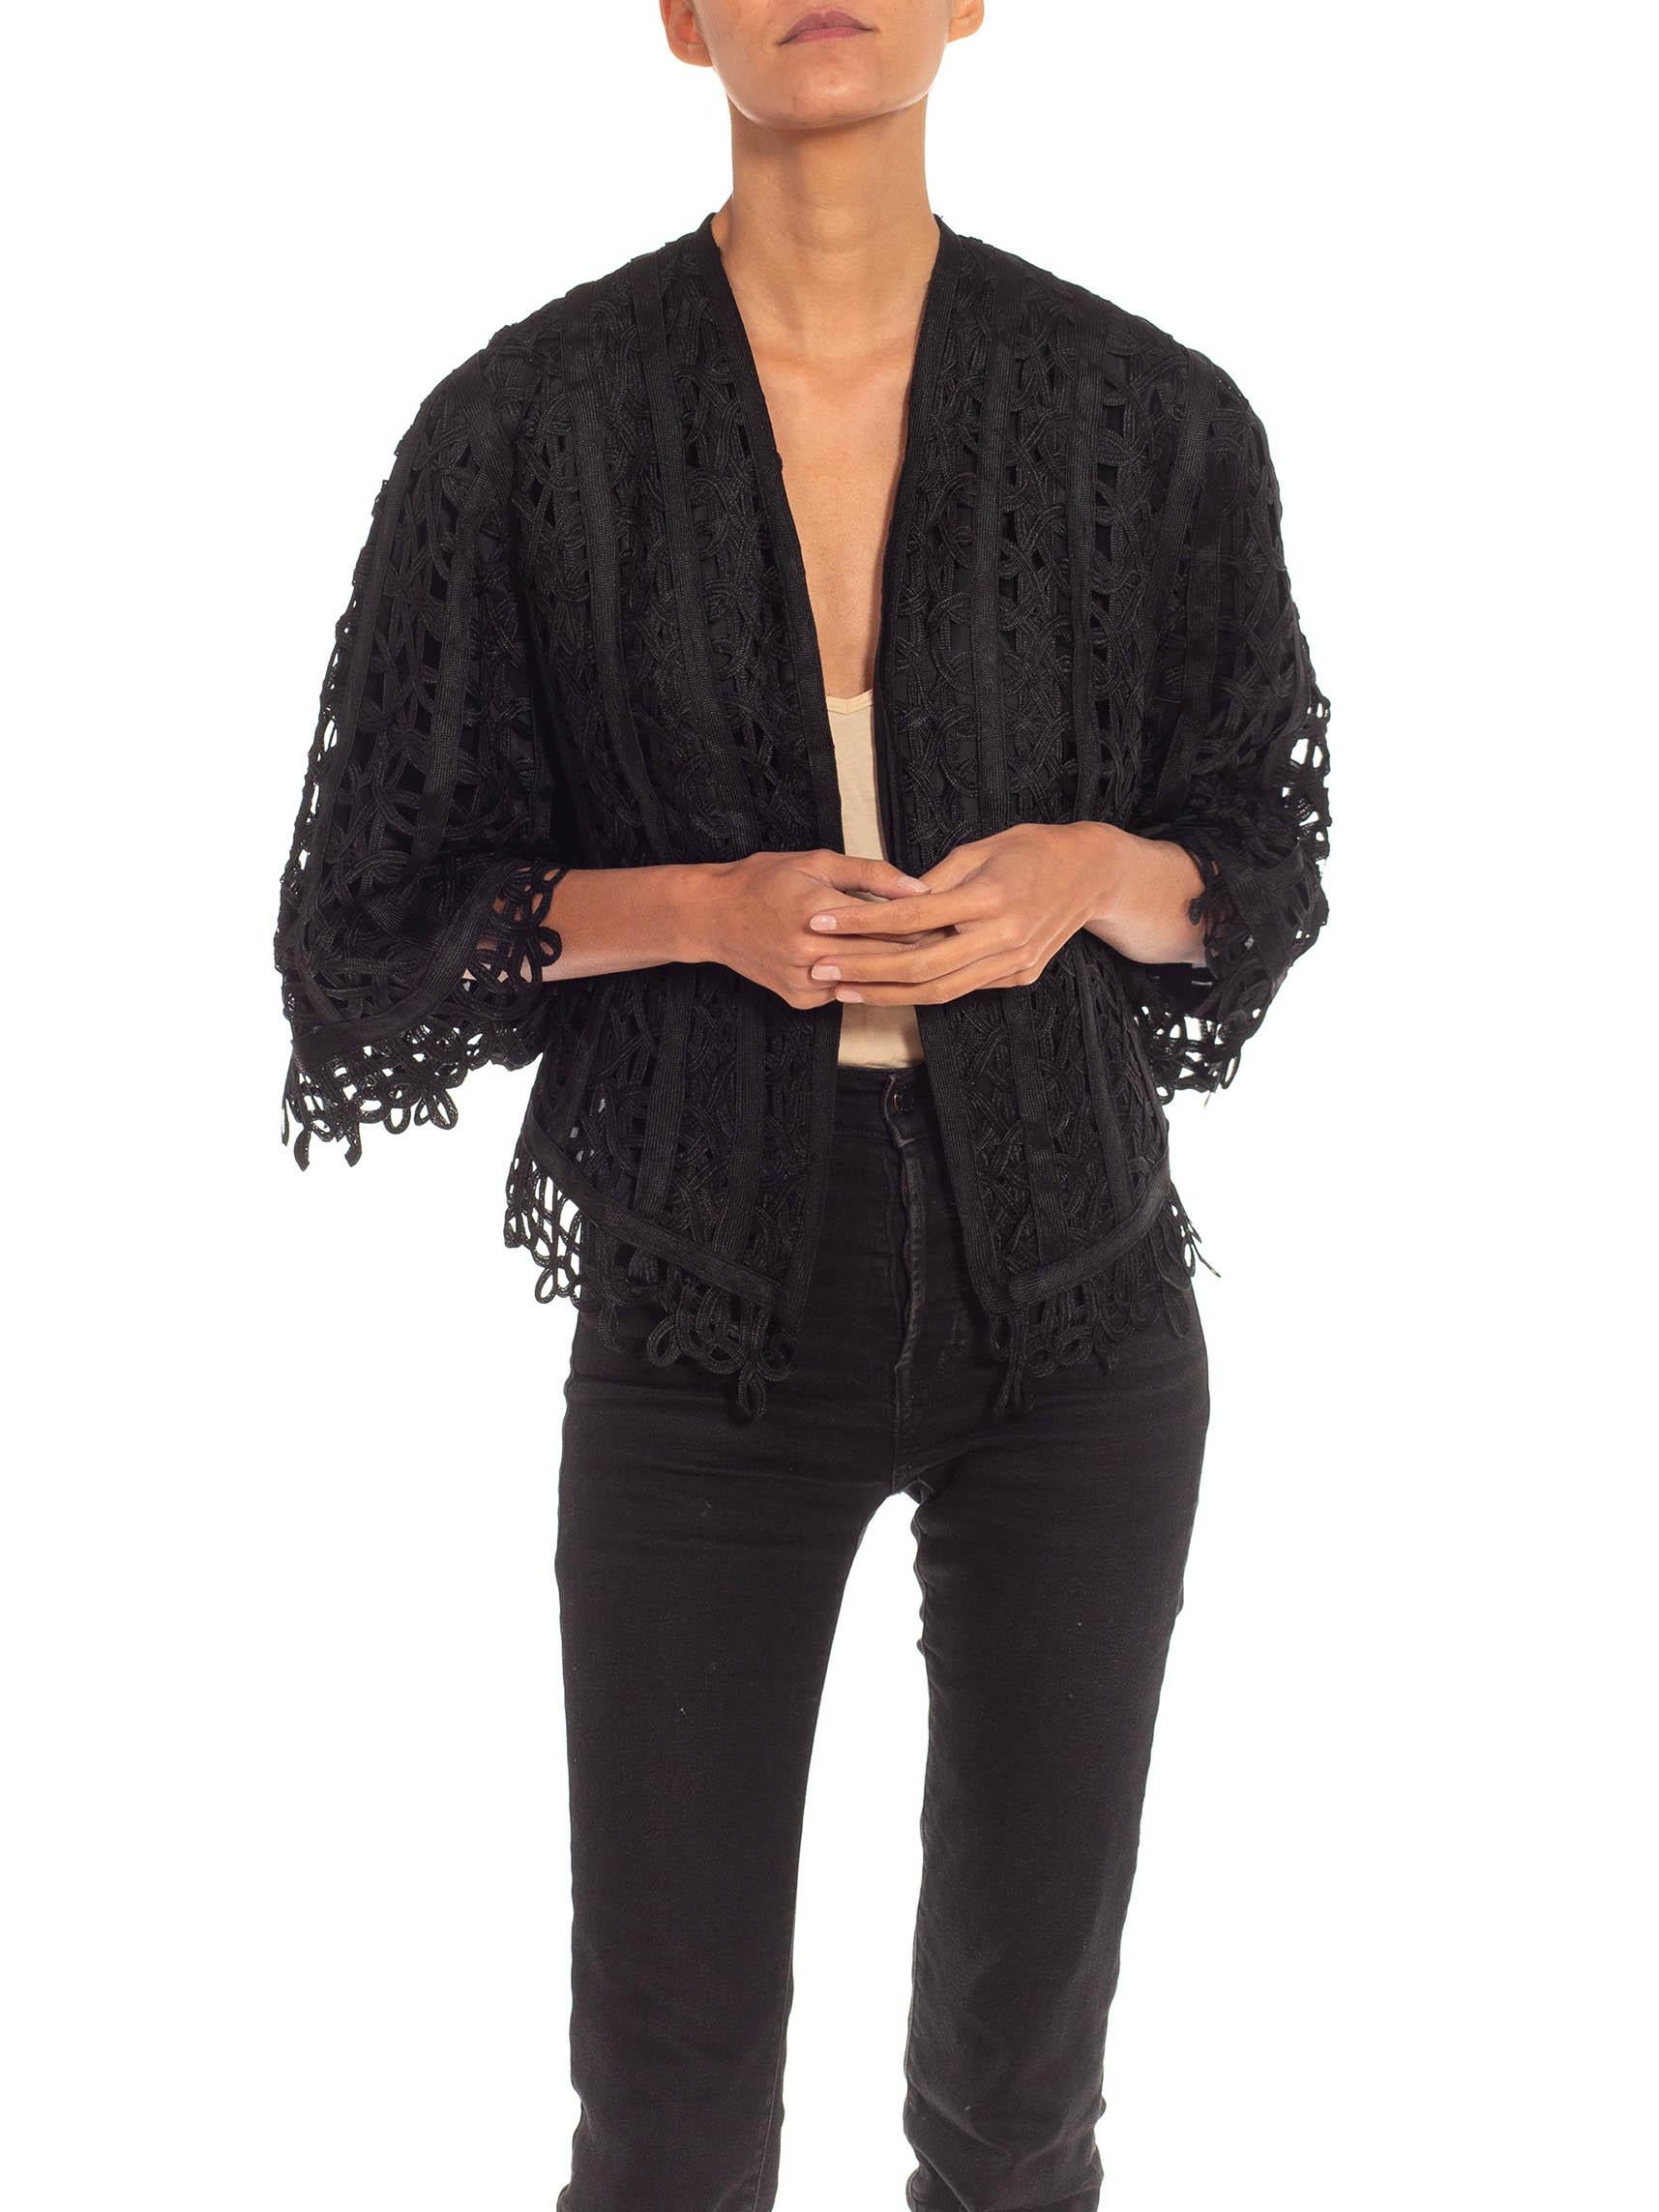 Victorian Black Silk Tape Lace Short Jacket With 3 Quarter Sleeves For Sale 4